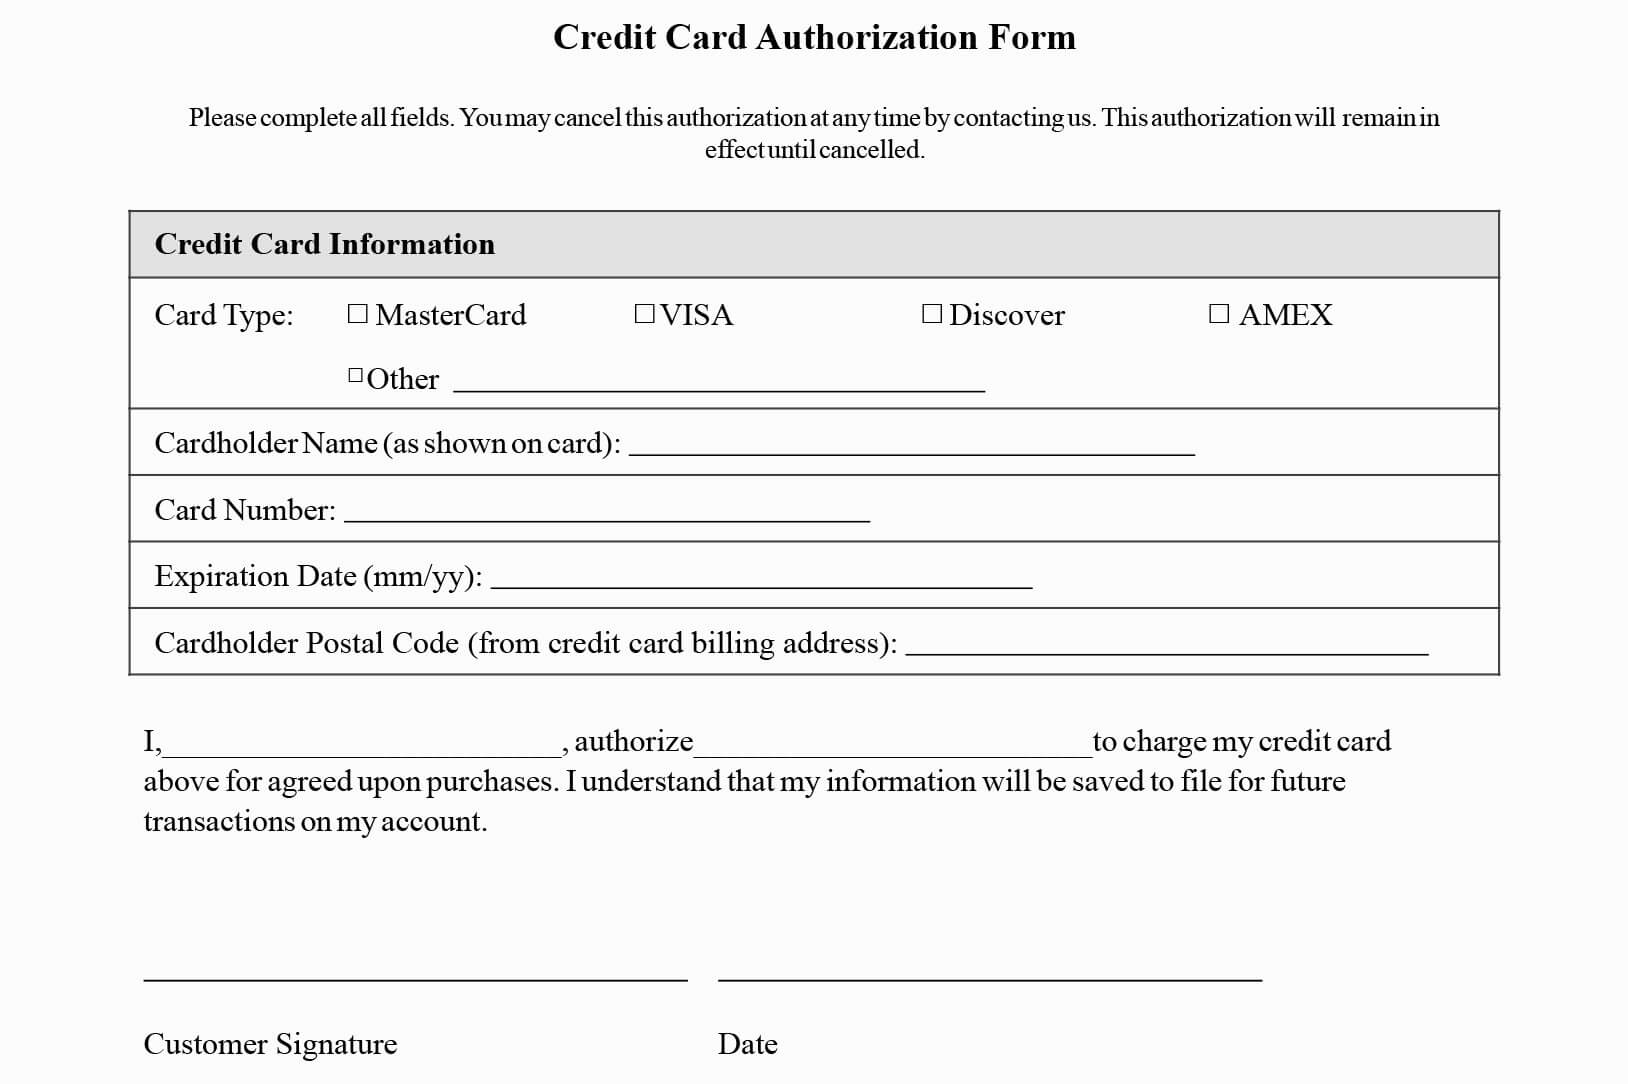 001 Credit Card Authorization Form Template Ideas Surprising With Regard To Credit Card Billing Authorization Form Template